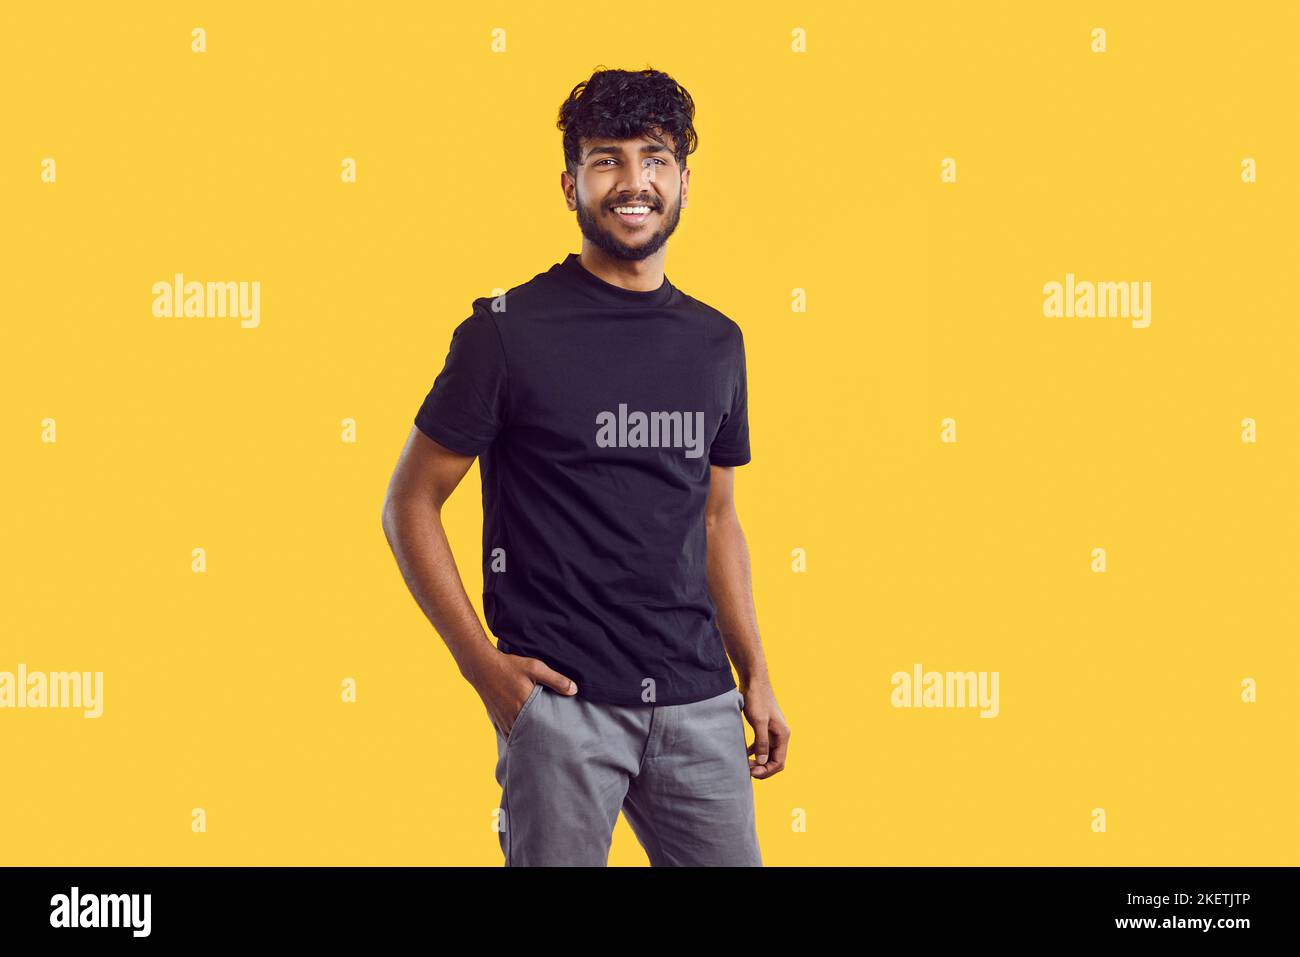 Young South Asian man with dark curly hair posing with smile in casual clothes stands in studio Stock Photo